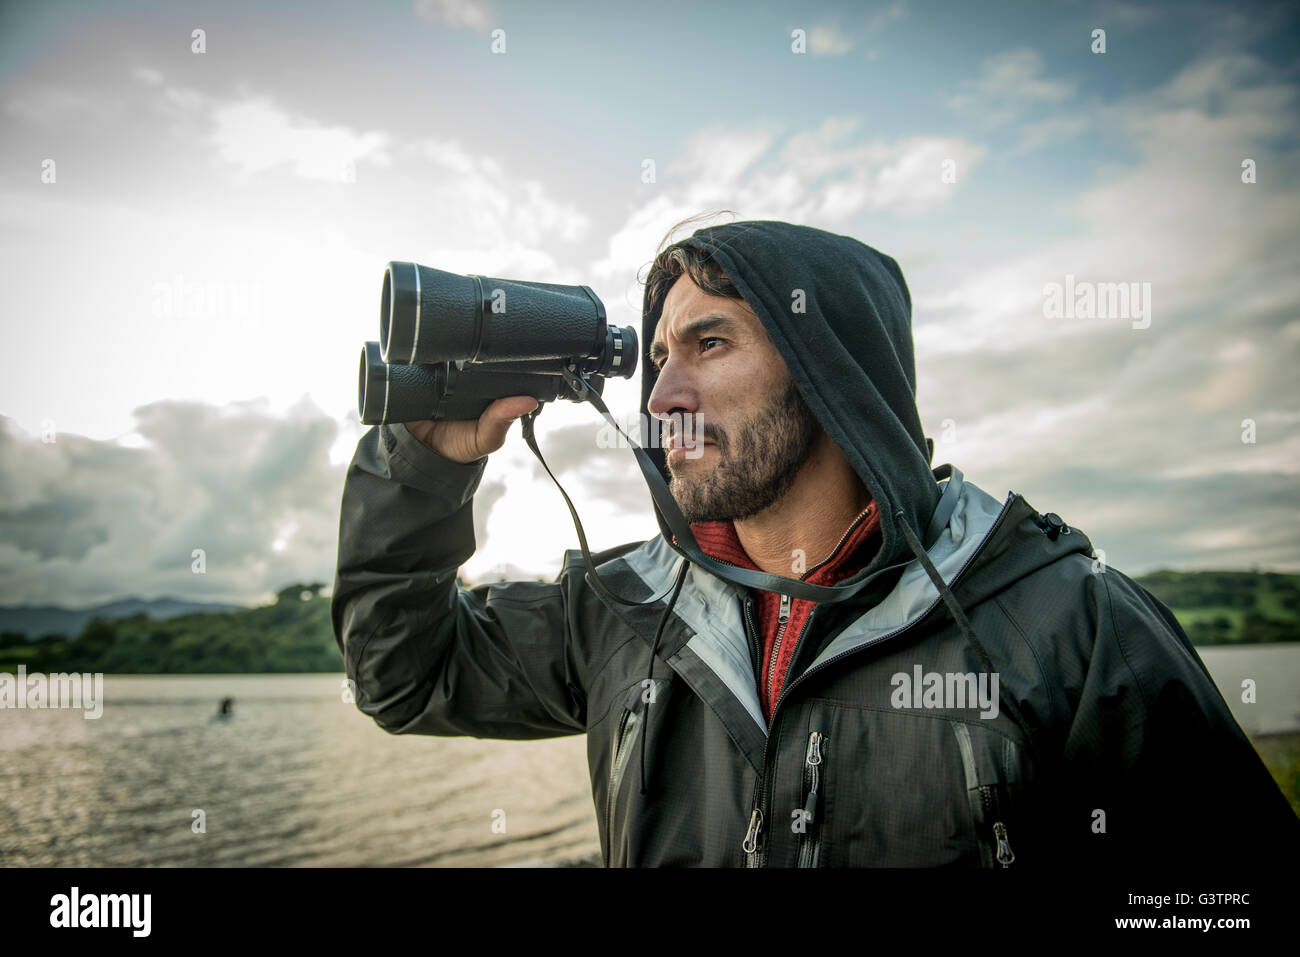 A bearded man in hiking clothes using binoculars on the shore of Bala Lake in Wales. Stock Photo